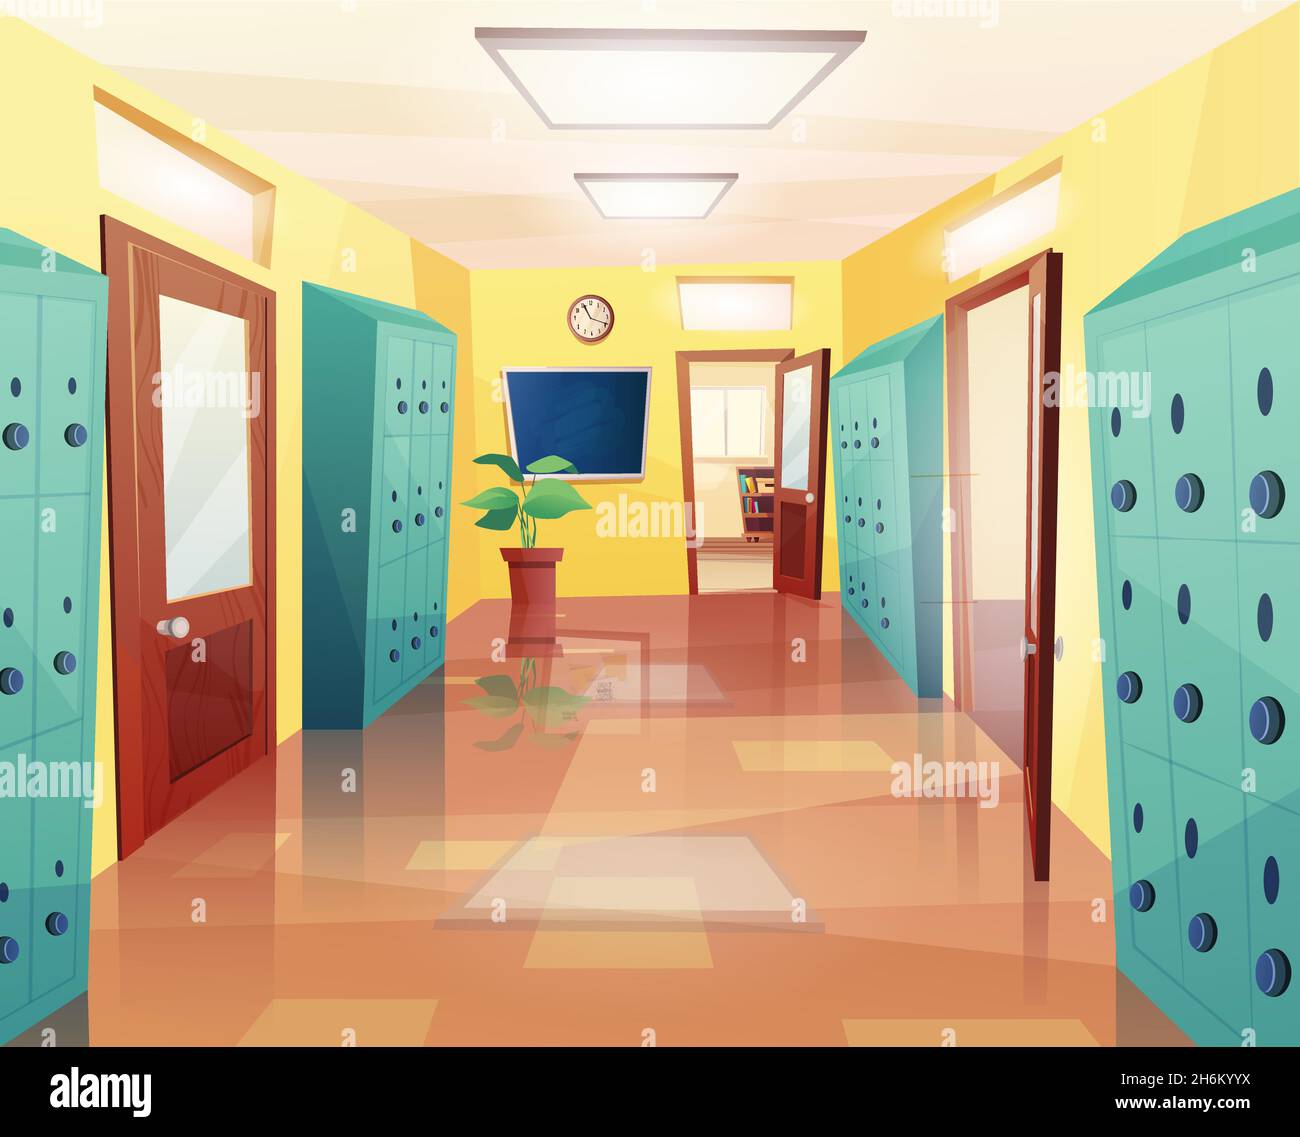 School, college hallway with open and closed doors, storage lockers, notice board. Illustration for kids game or web. Stock Vector